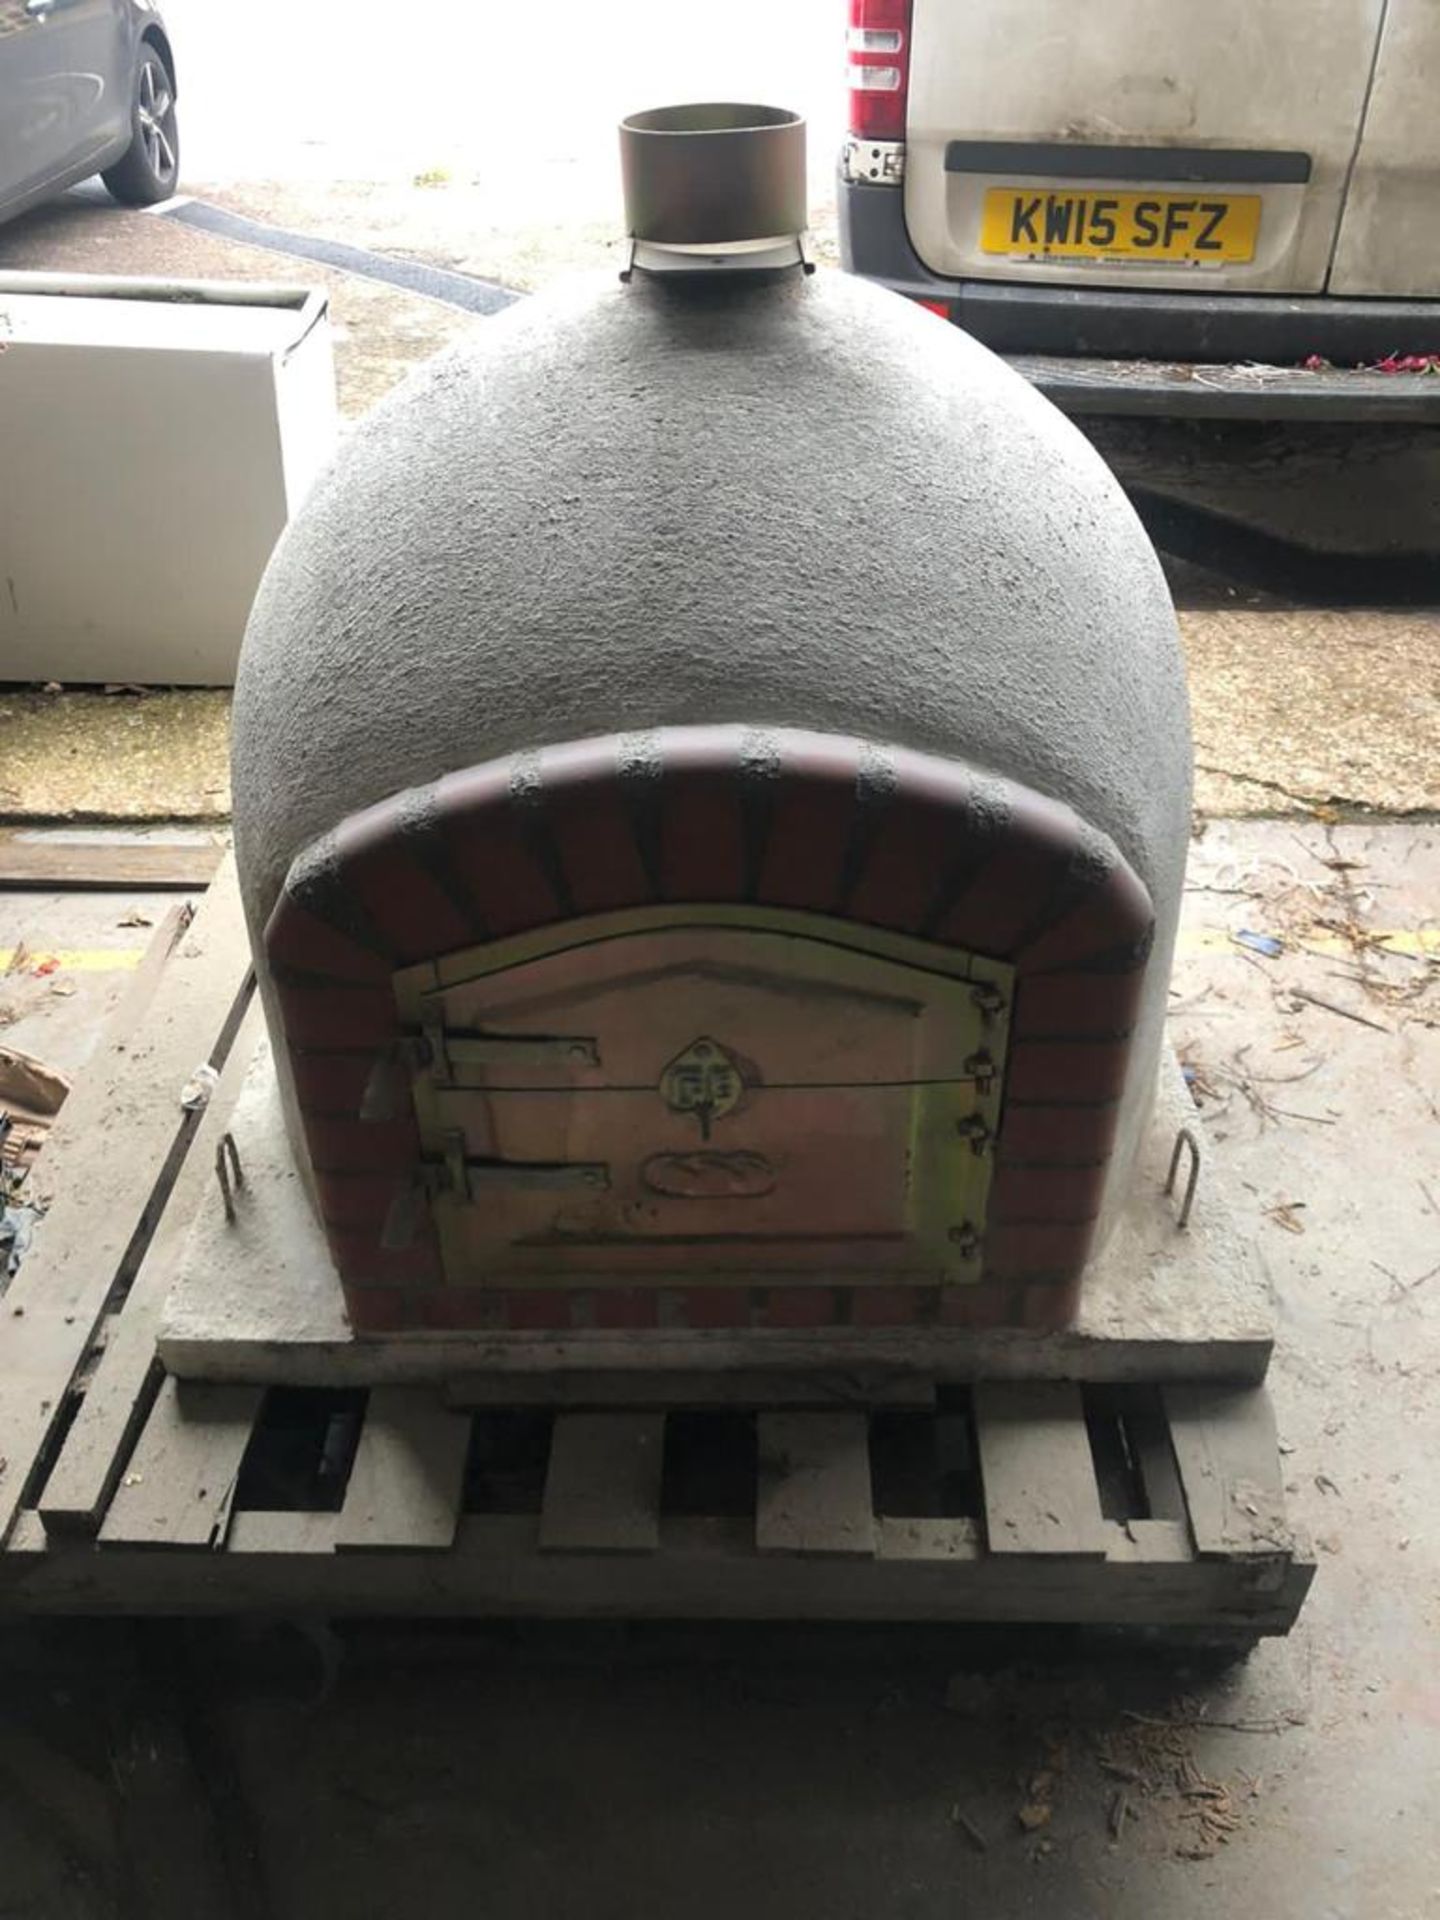 1 x Prestige Outdoor Wood-Burning Pizza Oven - CL548 - Location: Near Oadby, Leicestershire